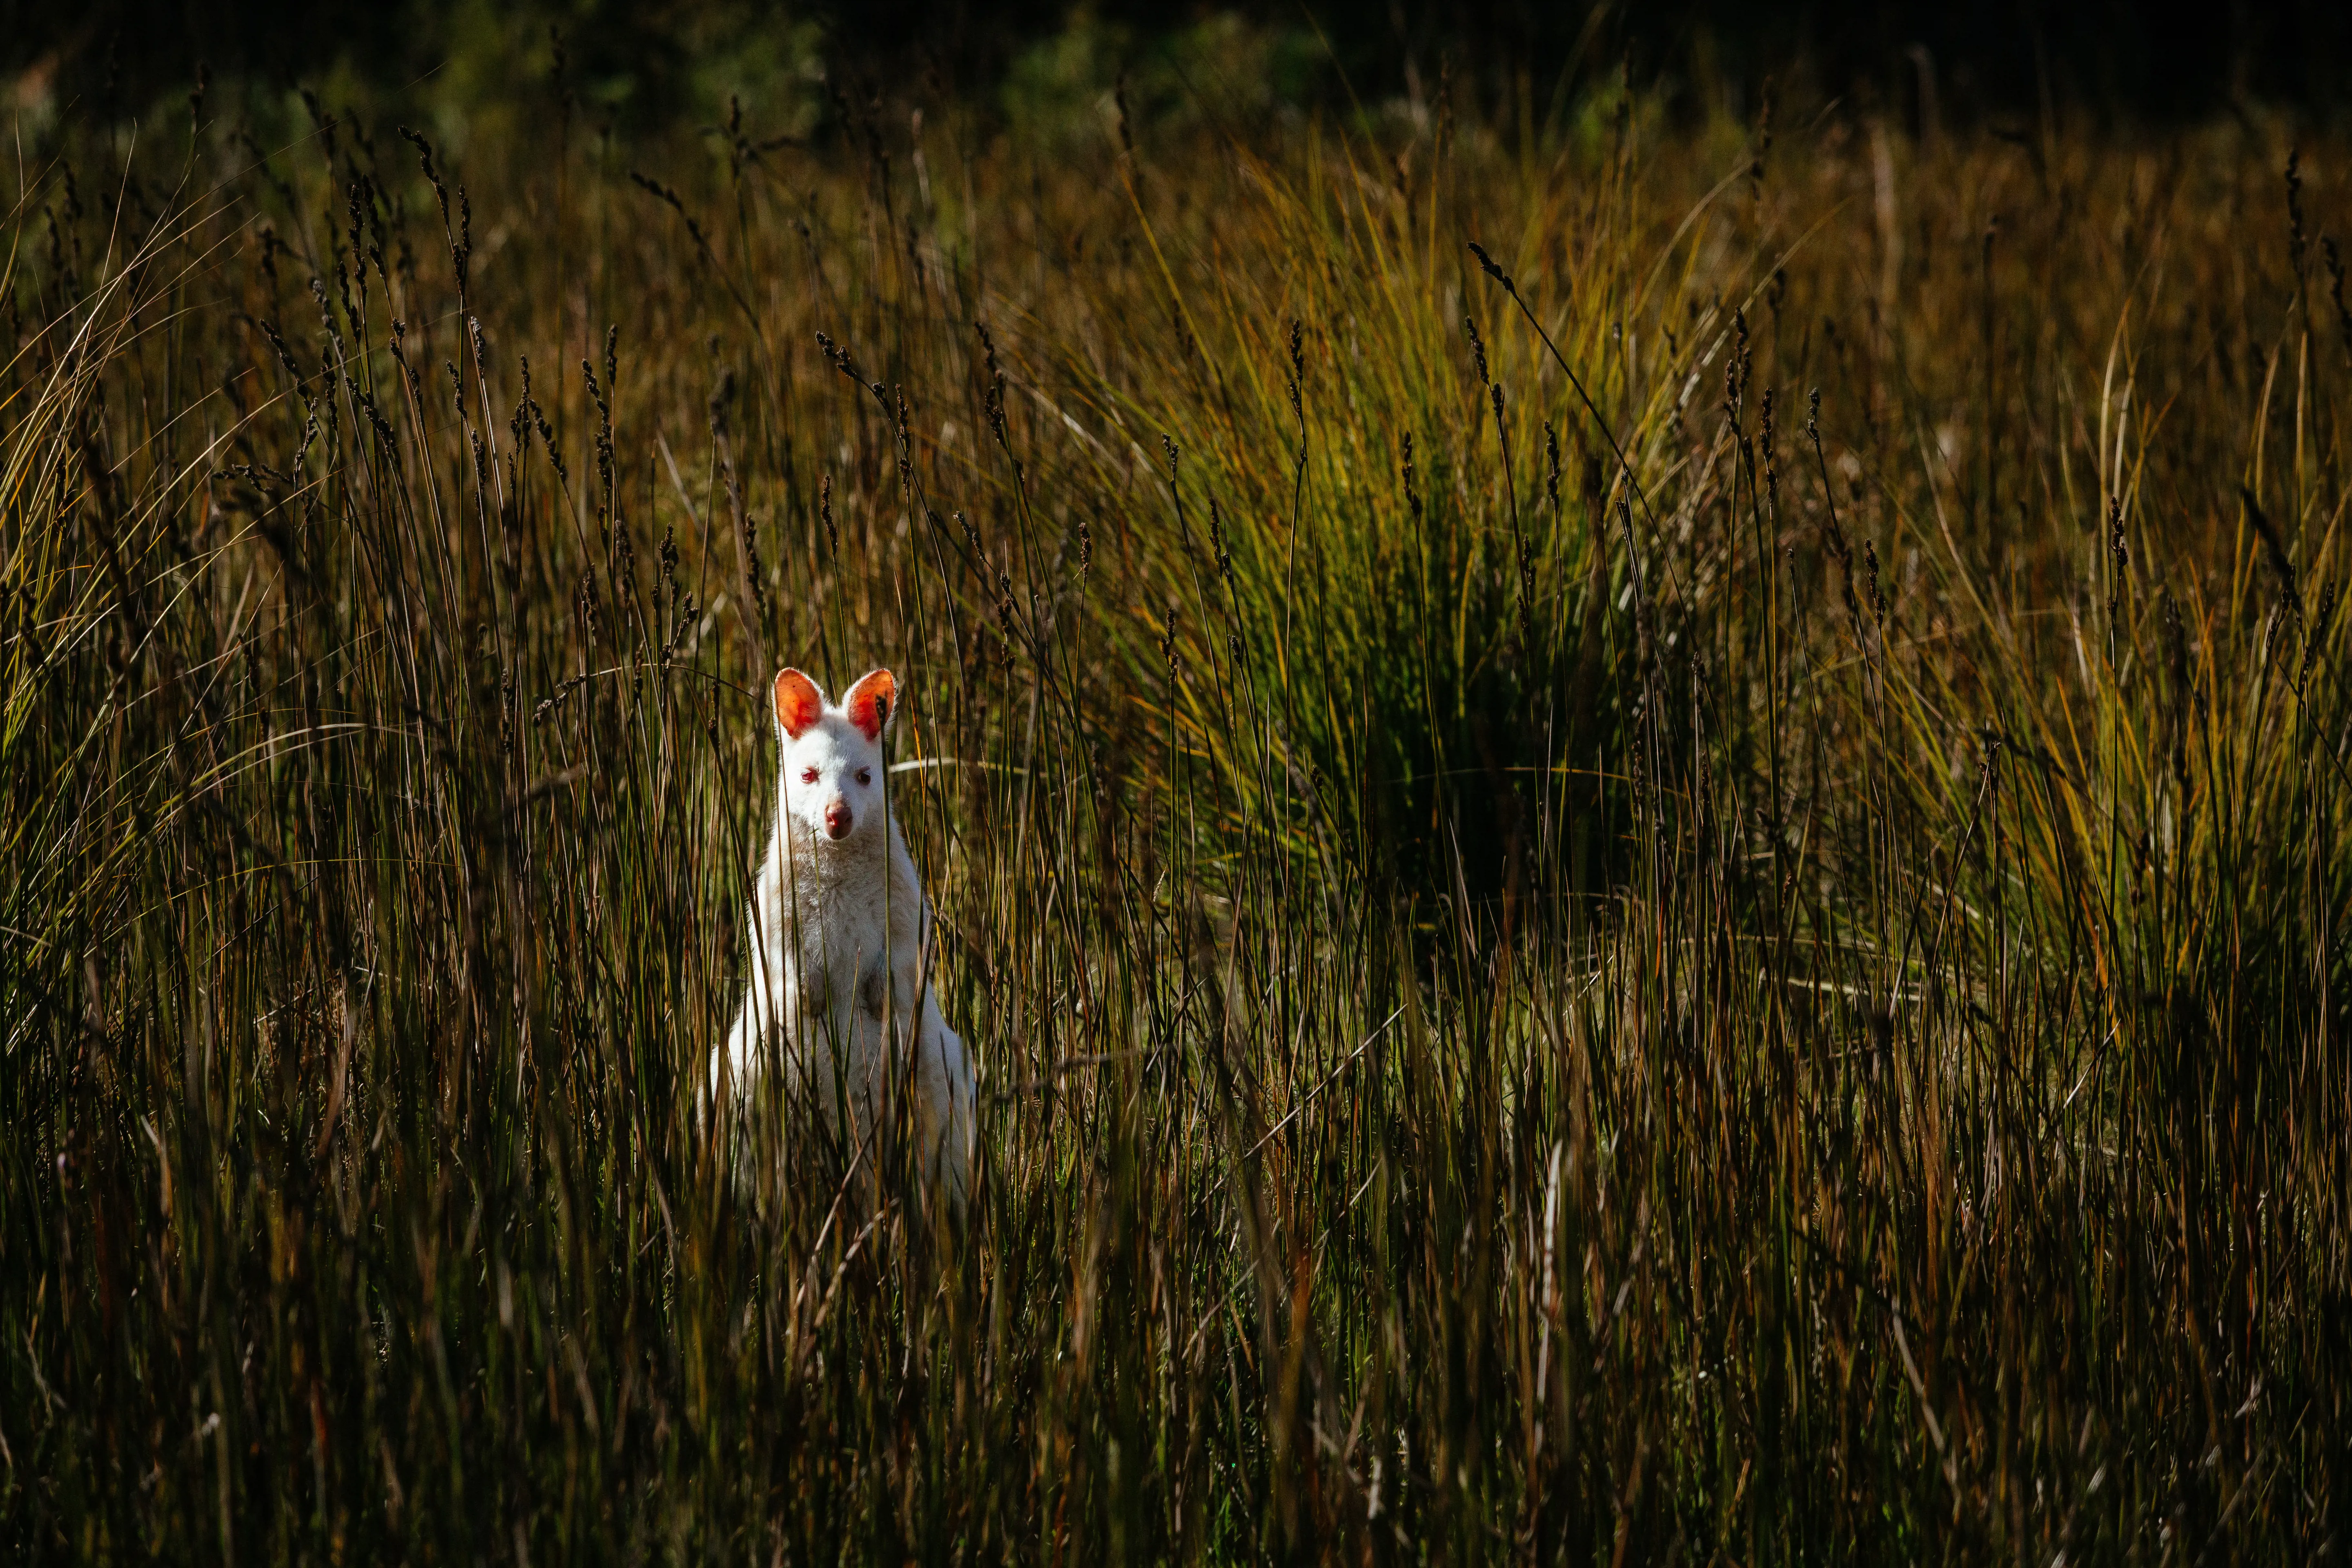 A small, white wallaby sits in tall grass and looks directly at the camera.